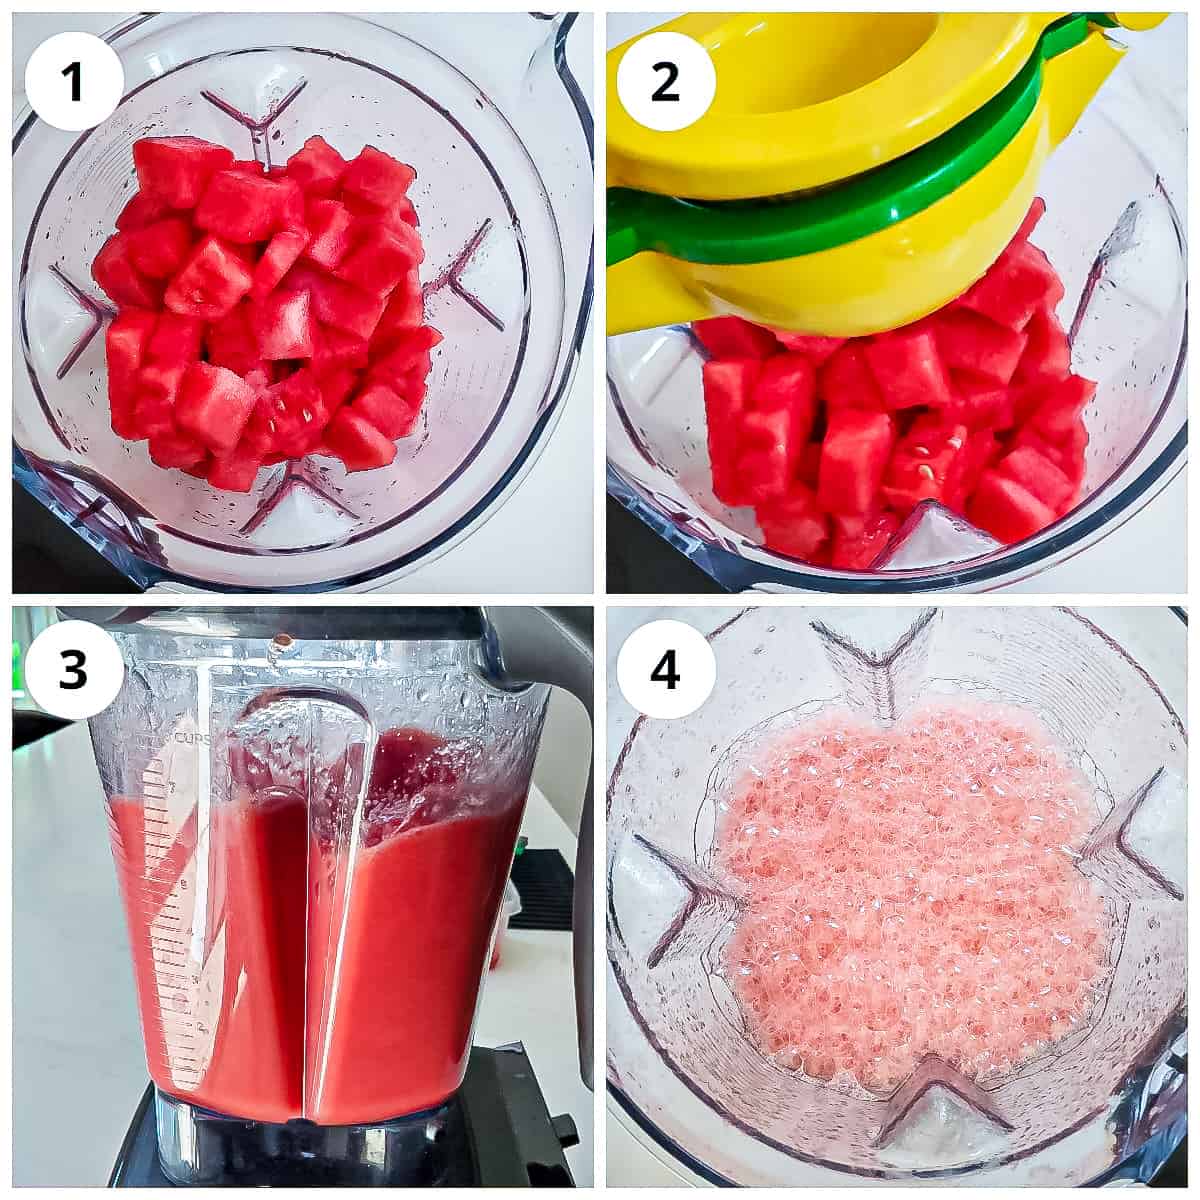 Steps showing how to make watermelon juice in a blender